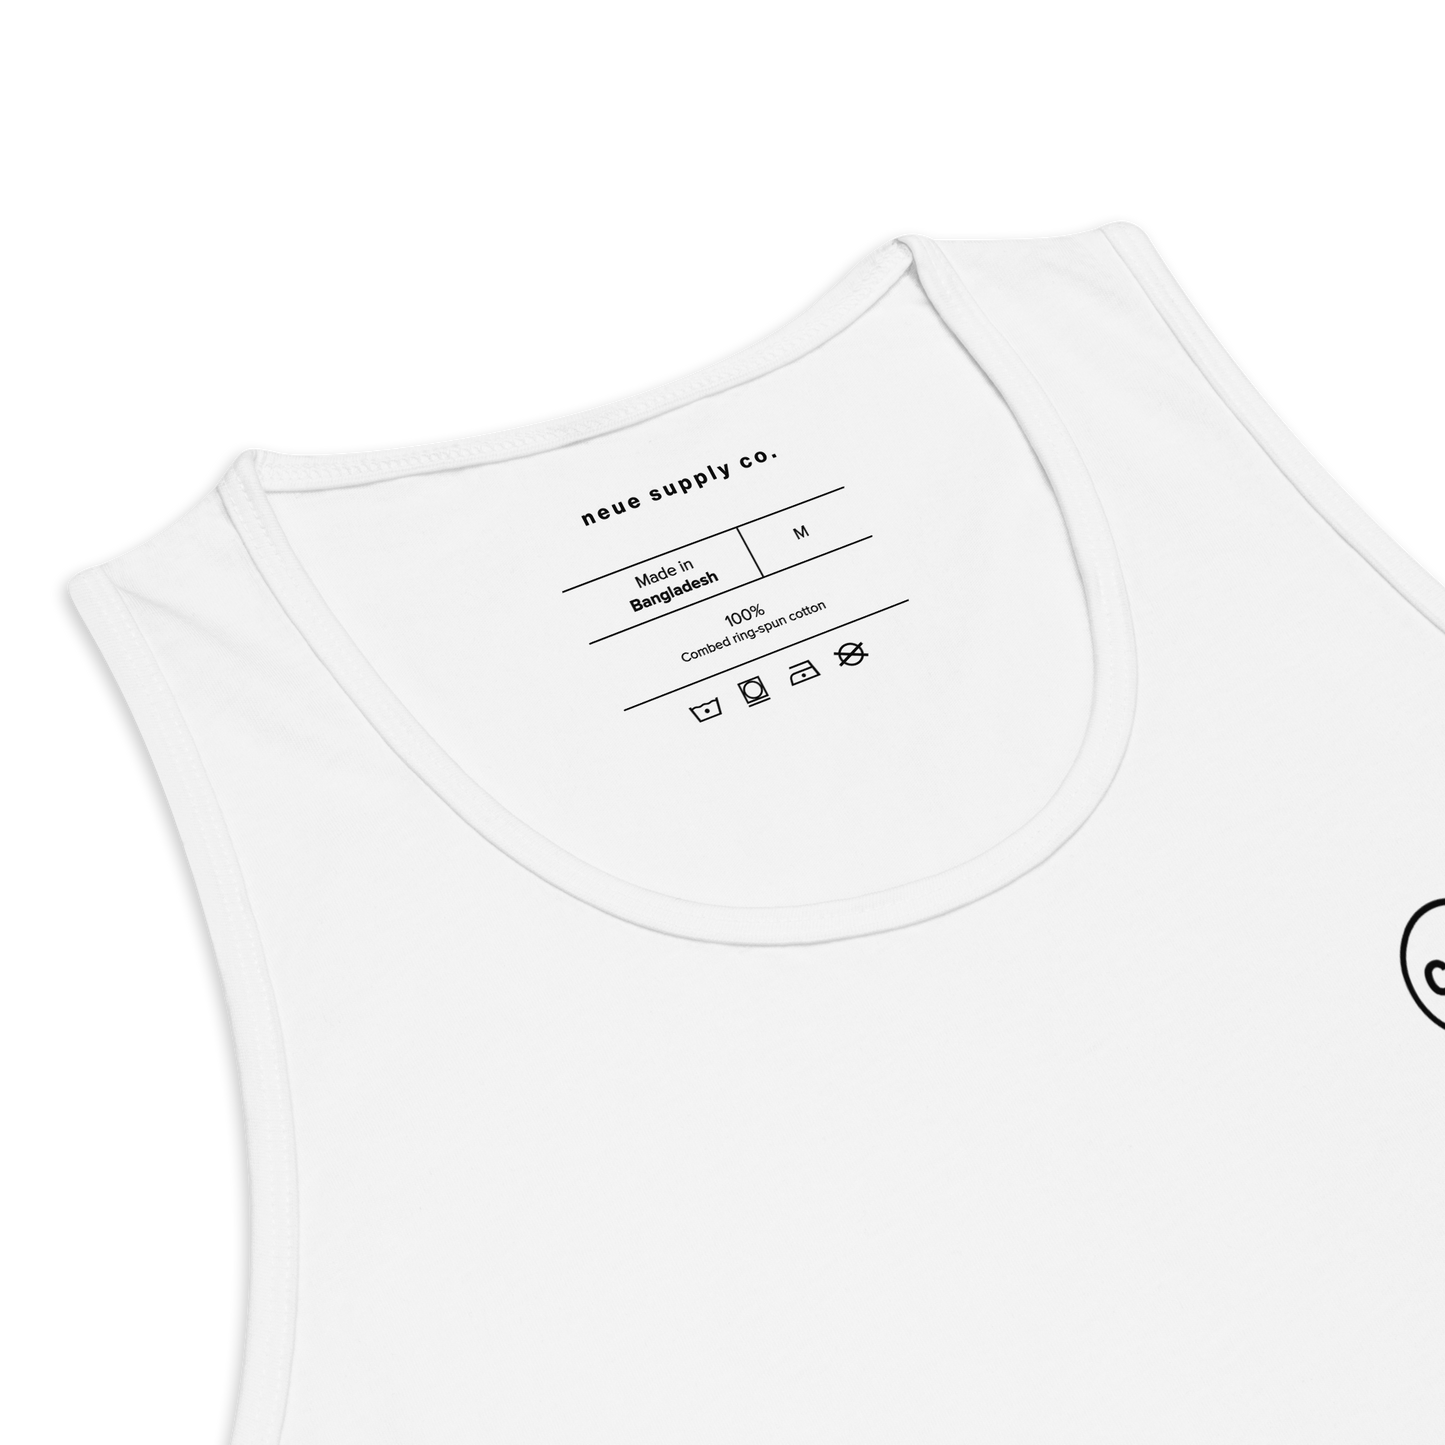 Neue Supply Co. Essential Workout Tank Top for Men in White detail view